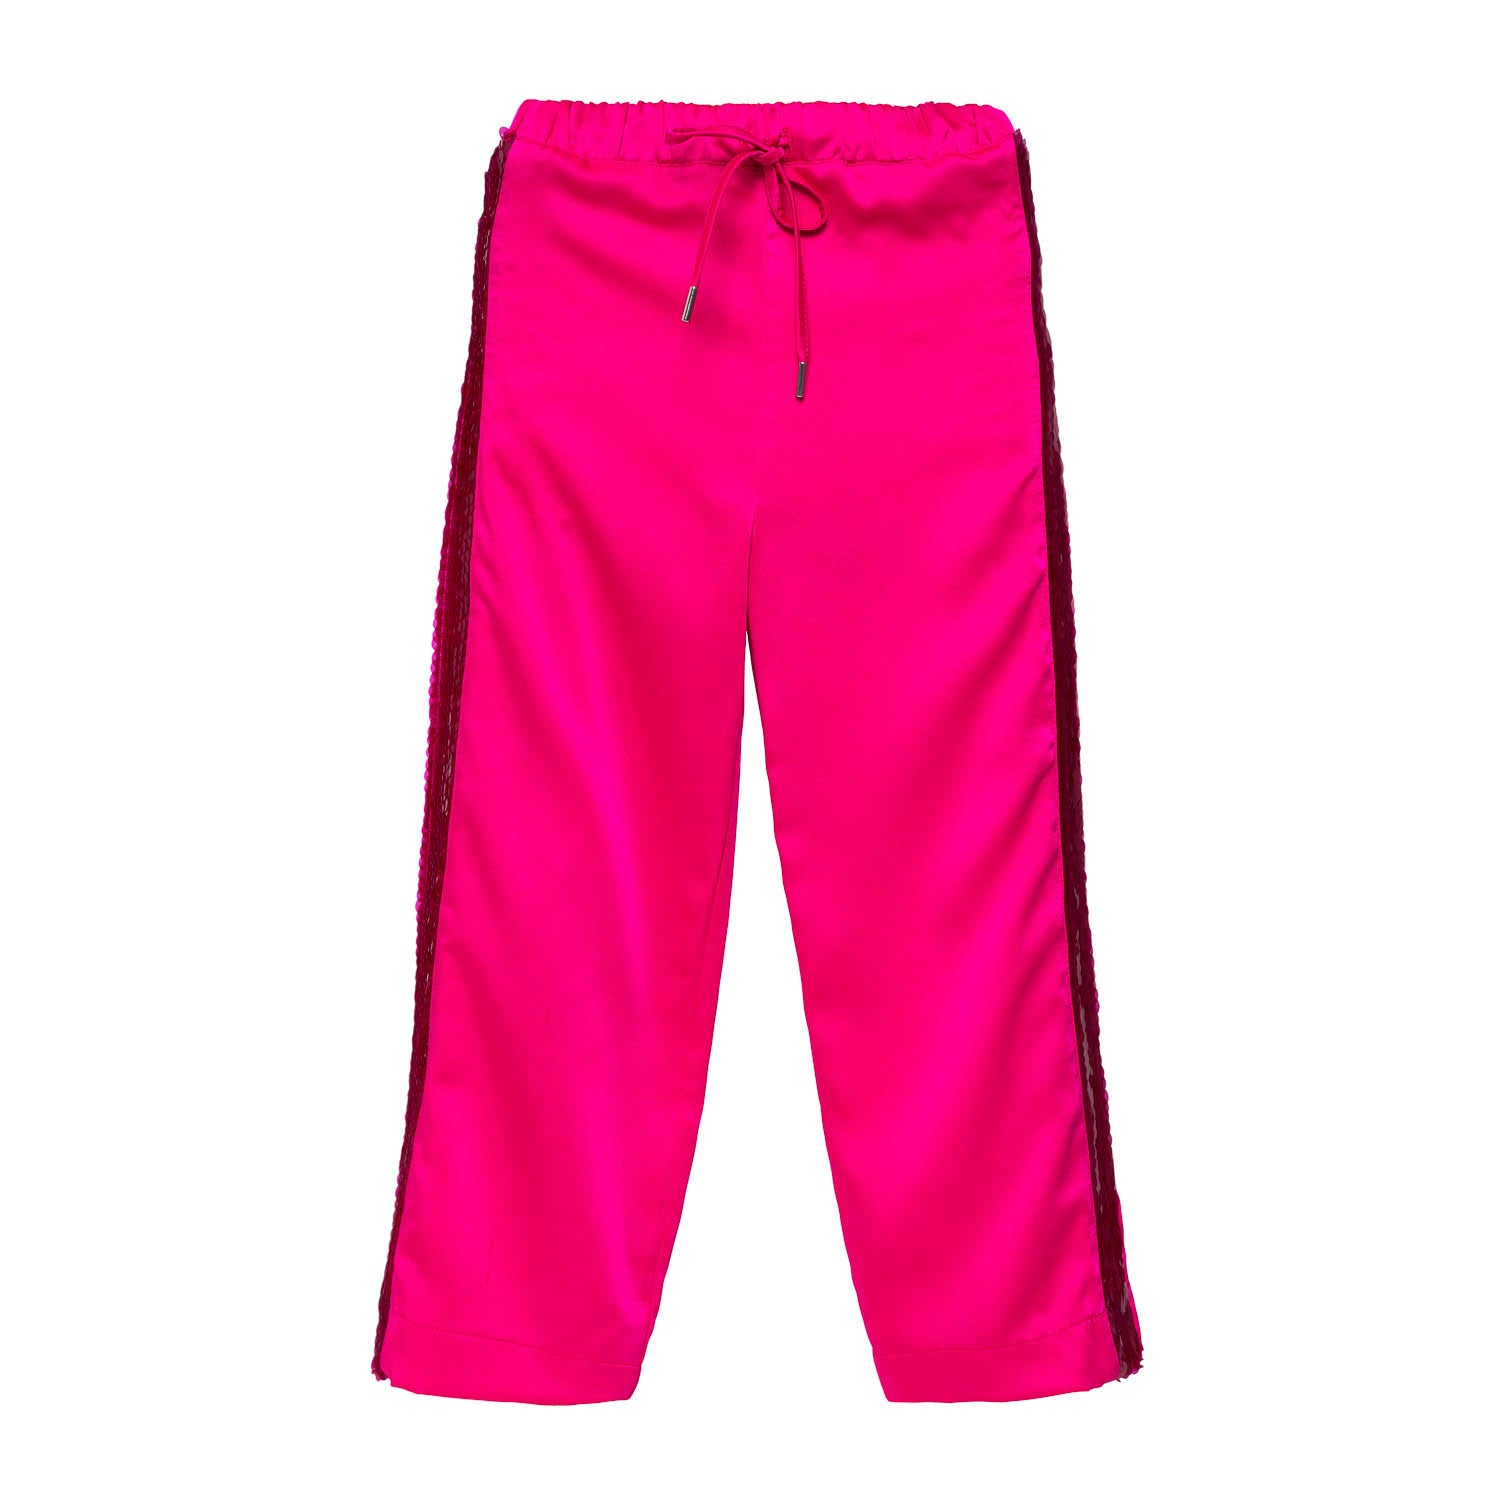 Pink Satin Trousers with Sequin Side Detail